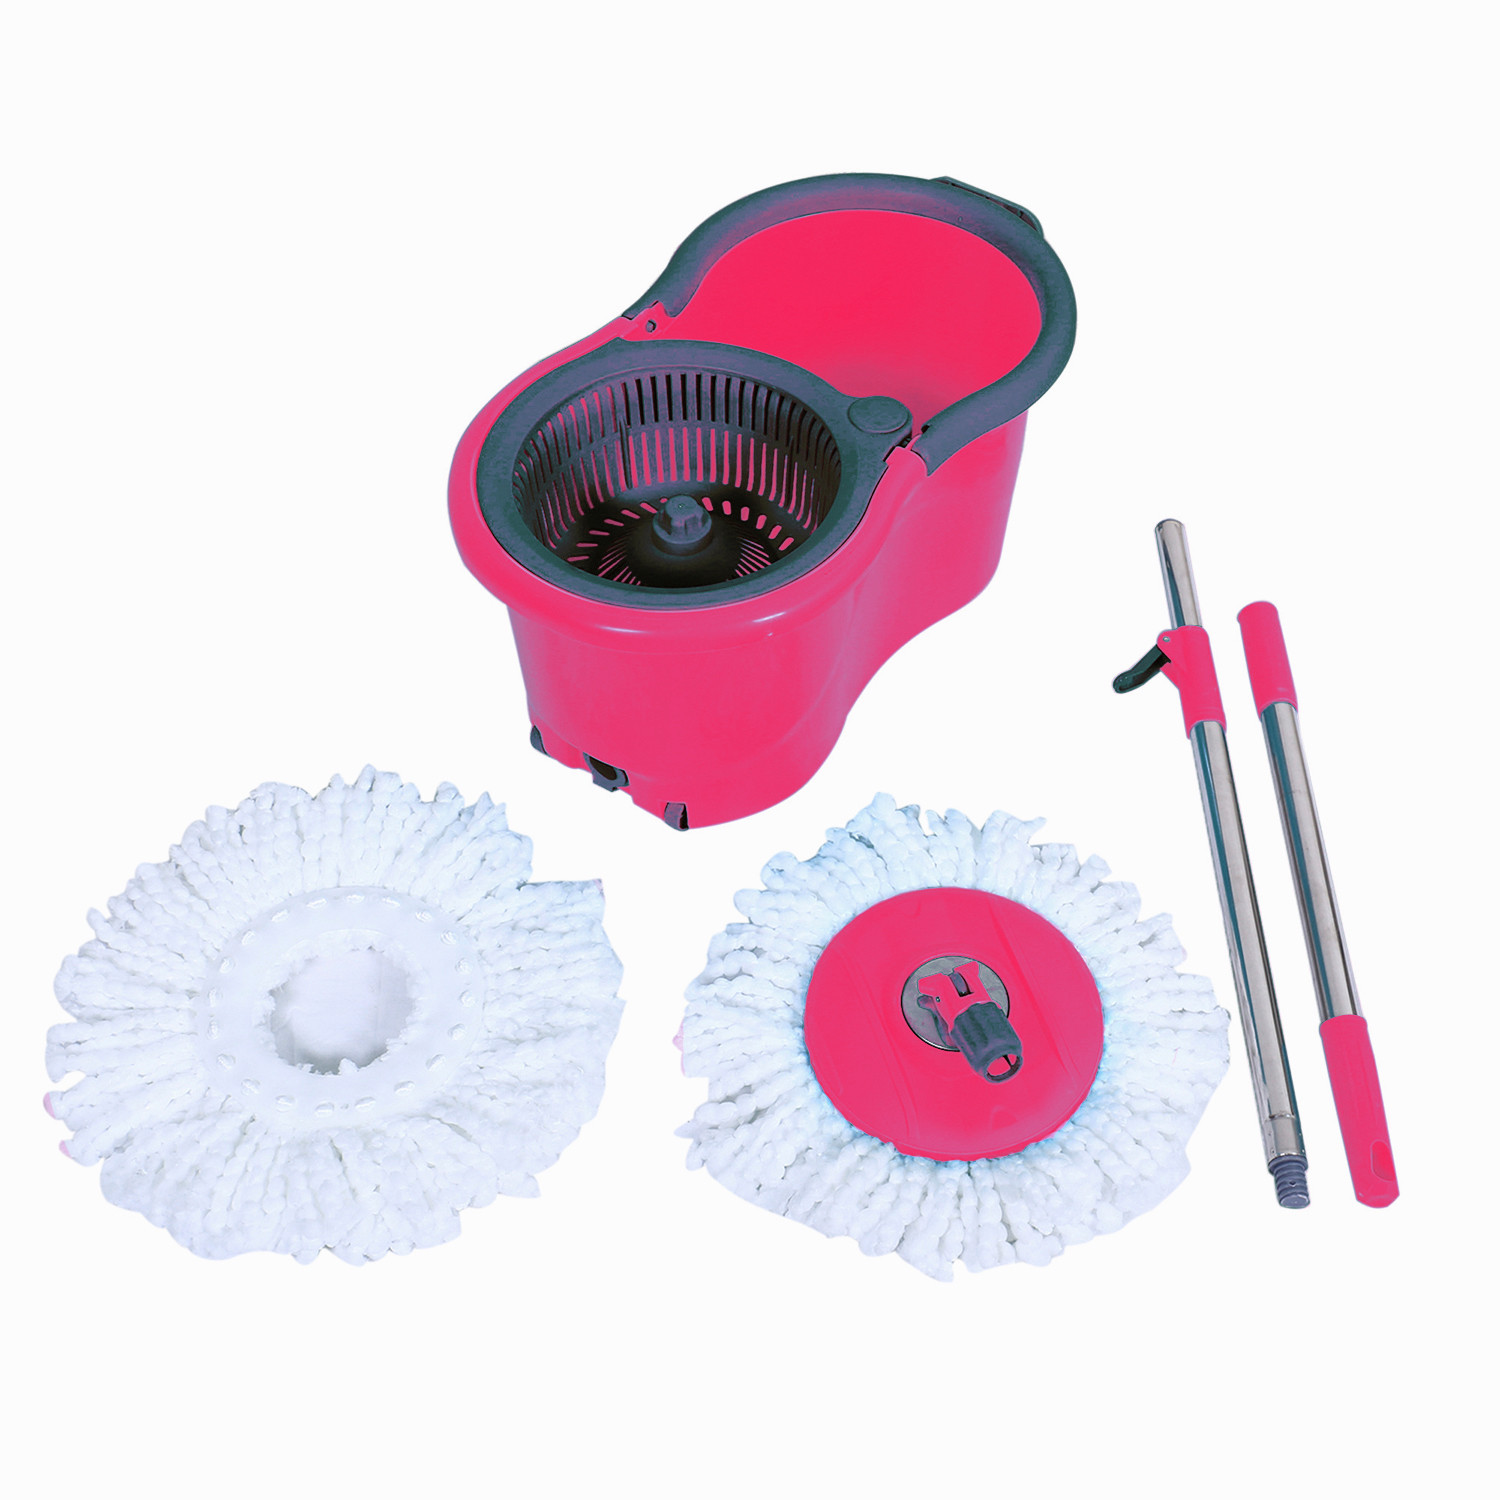 Kuber Industries Plastic Adjustable Mopping Set & 2 Microfiber Head Refill With Wheels Bucket And Auto Fold Handle For Floor Cleaning (Pink)